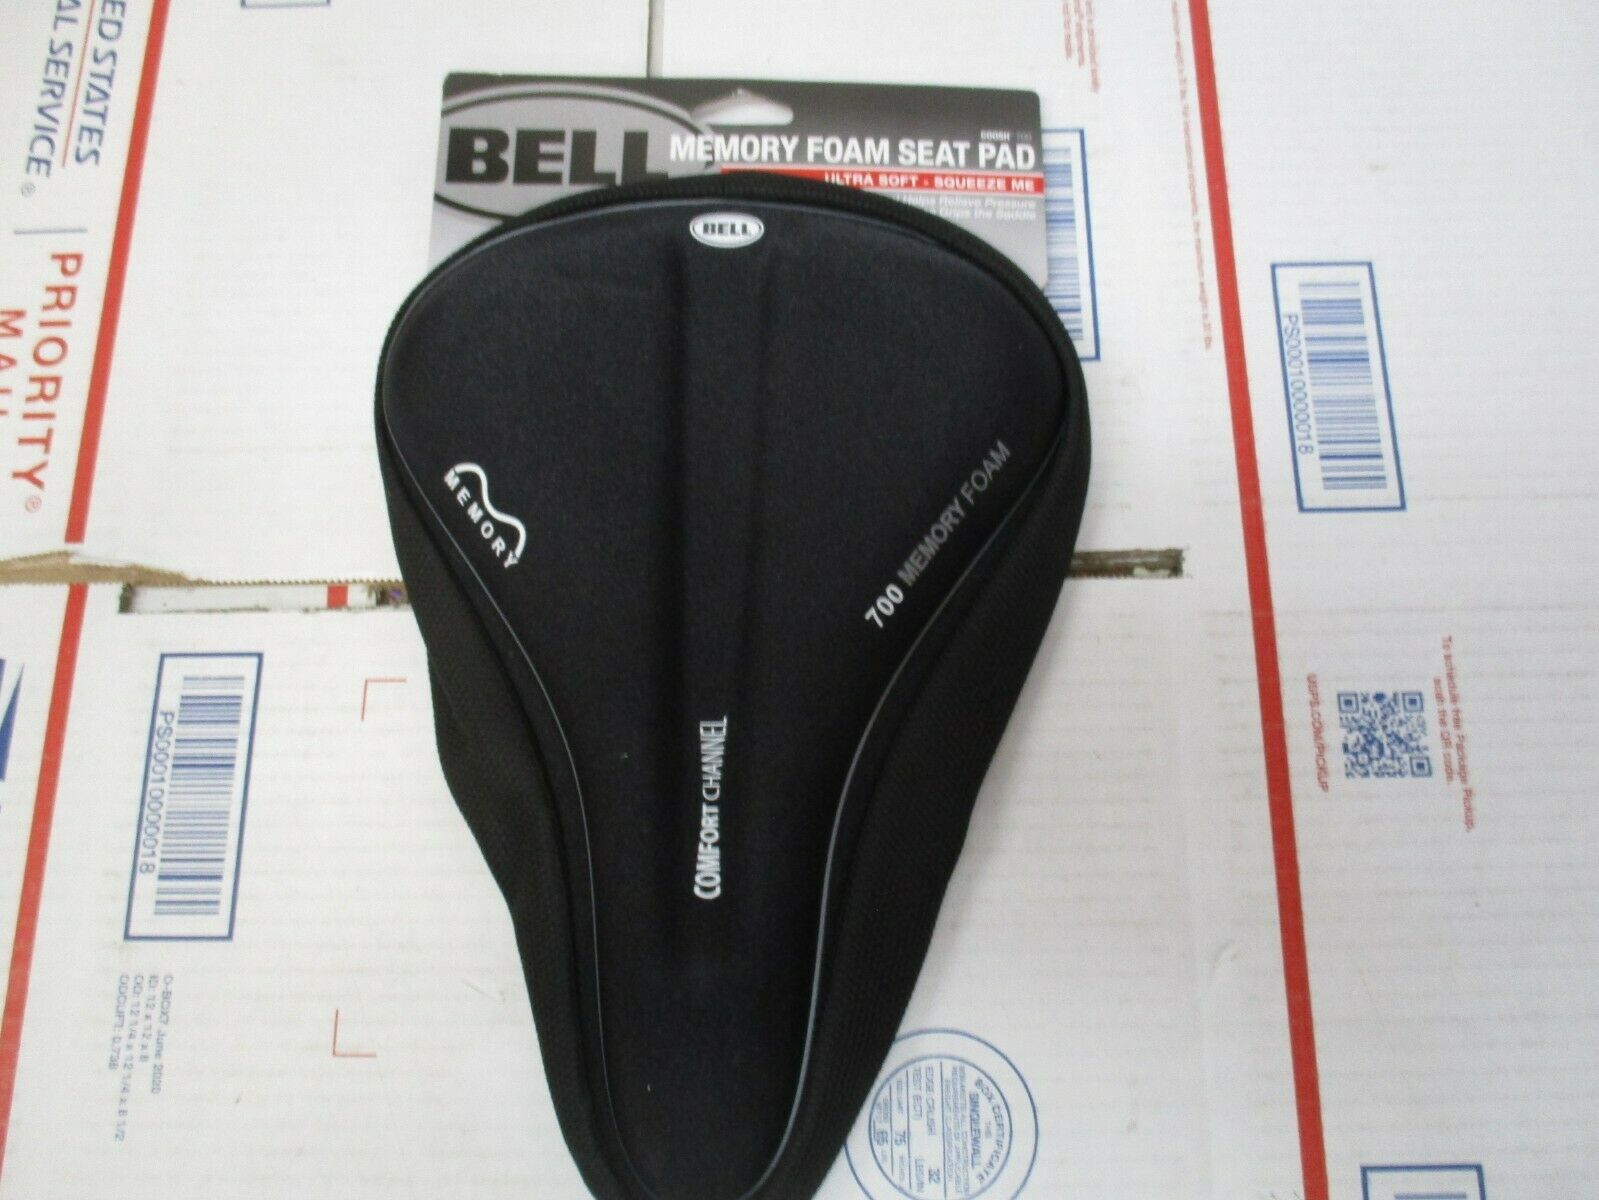 Bell Memory Foam Black Seat Pad 7122188 Ultra Soft New With Tags Fast/free Ship